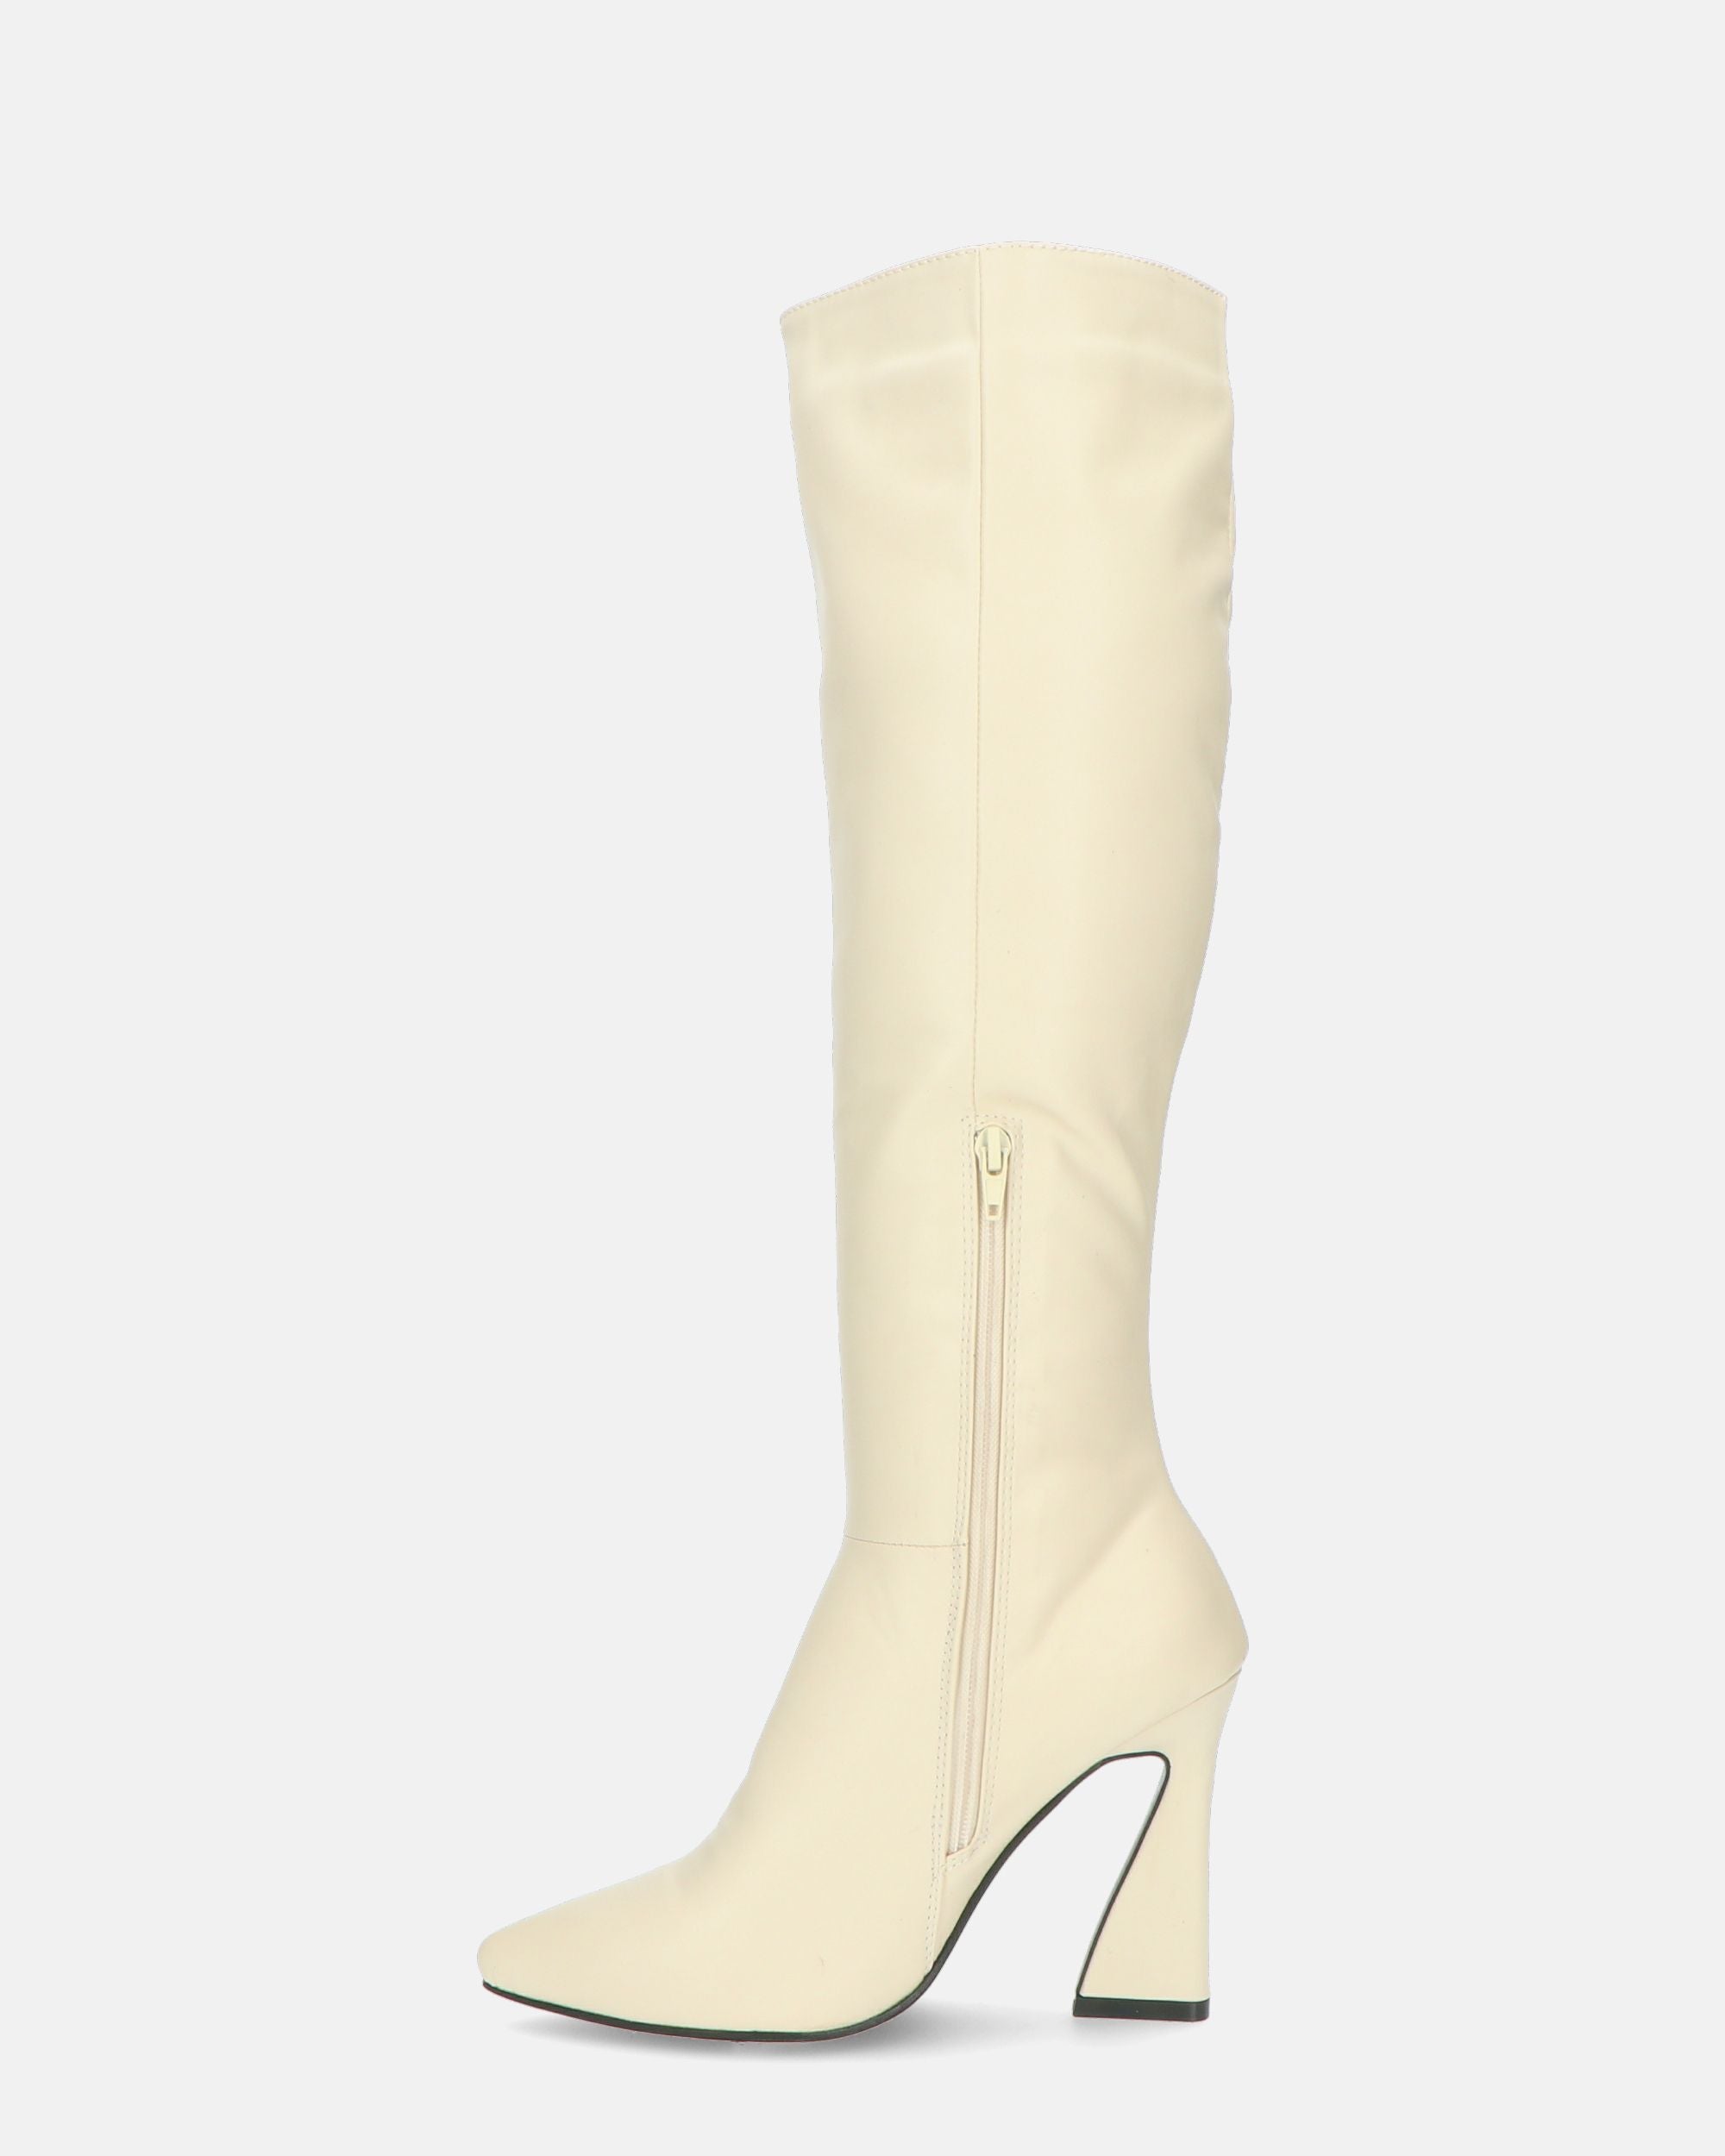 KELLY - beige high boot with side zip